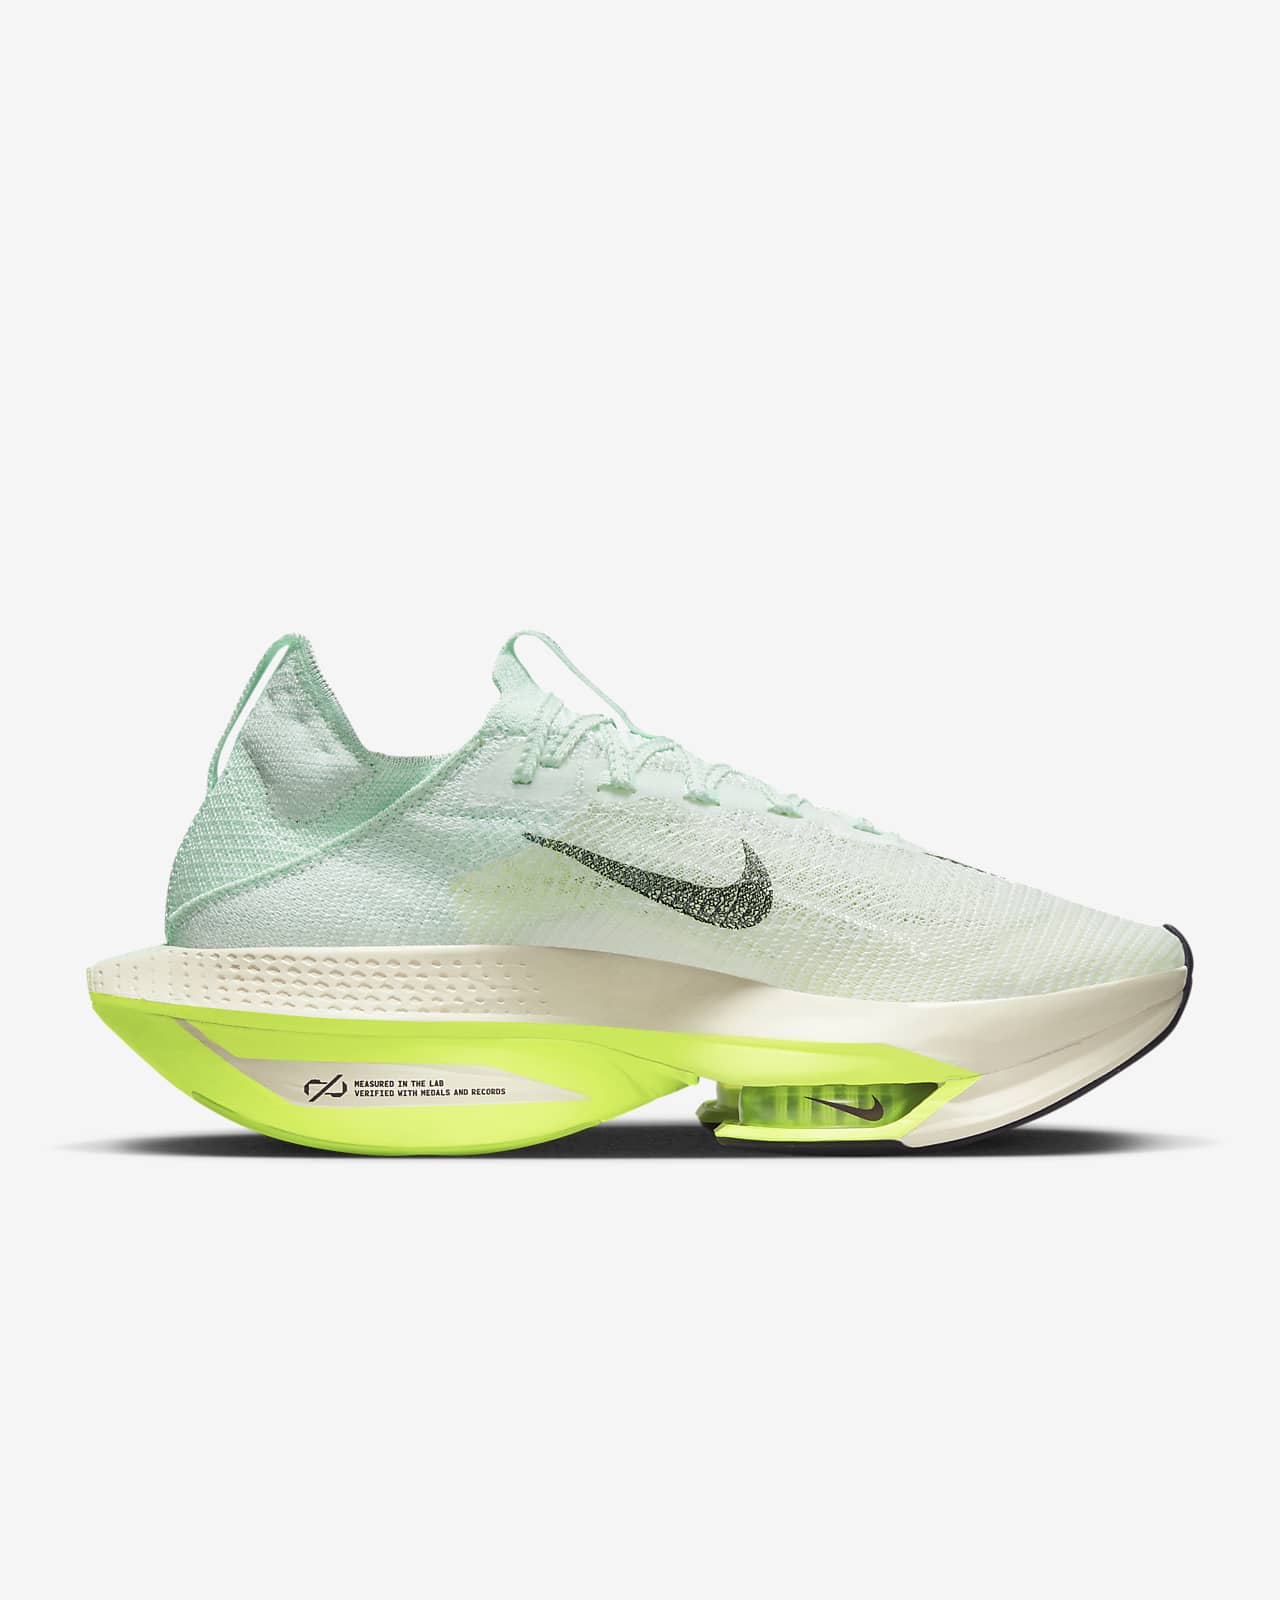 Nike Air Zoom Alphafly NEXT% 2 Men's Road Racing Shoes